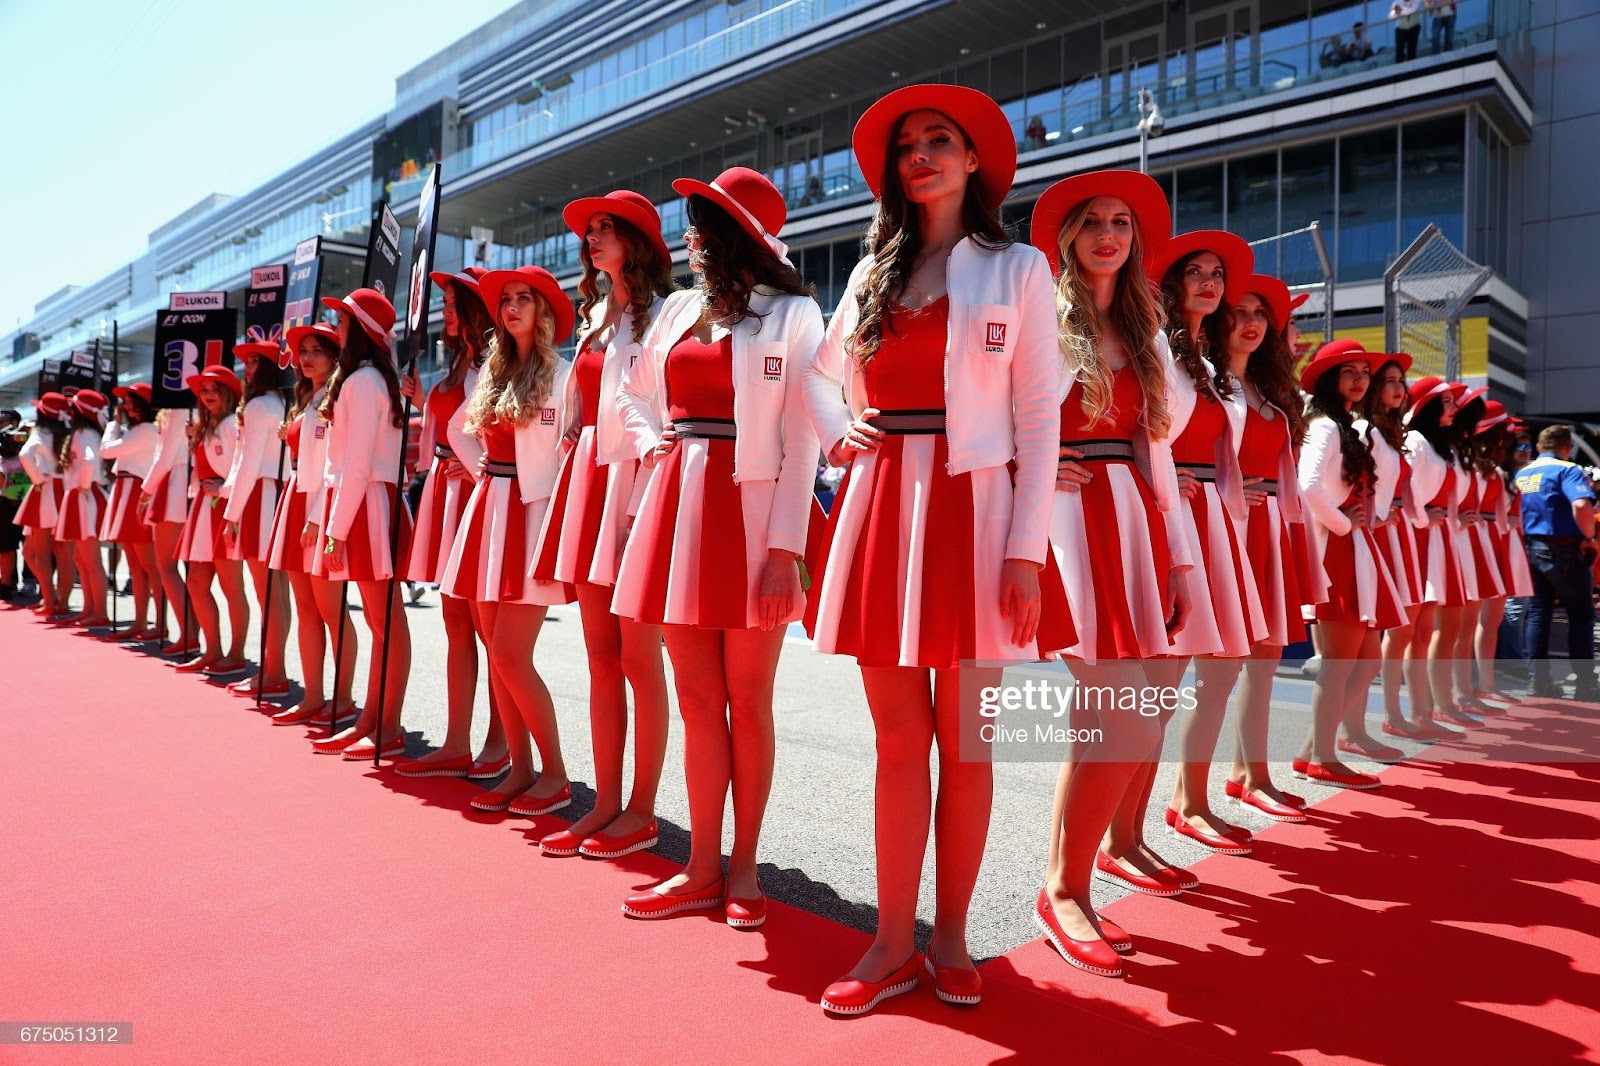 Grid girls at the drivers parade during the Formula One Grand Prix of Russia on April 30, 2017 in Sochi, Russia.